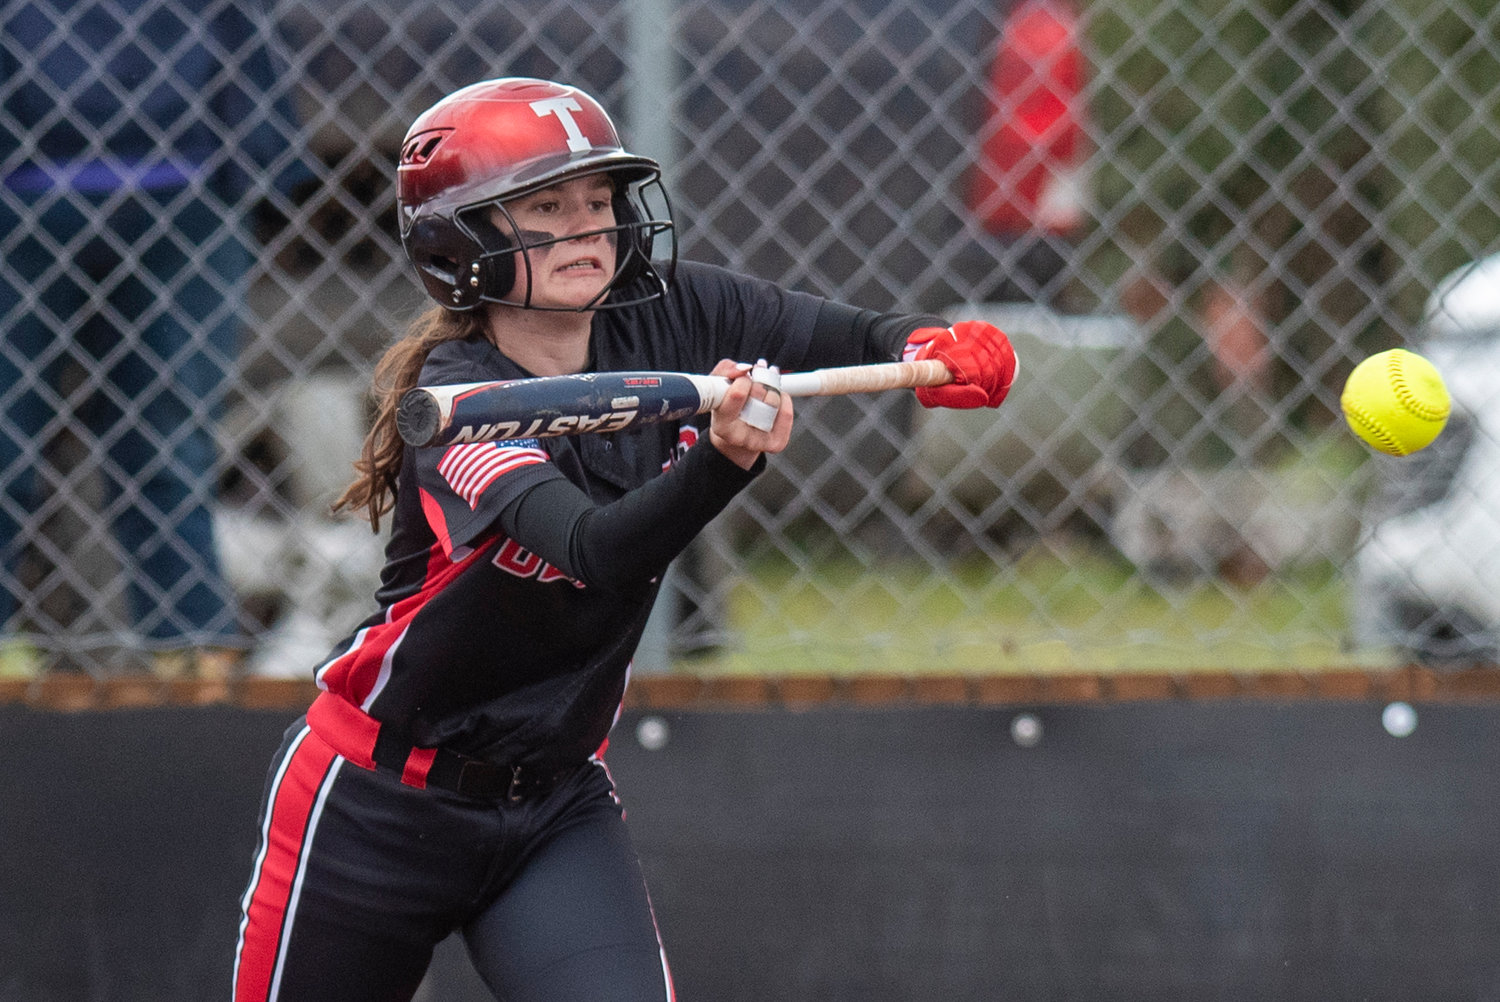 Tenino's Kayla Feltus prepares to lay down a bunt during a league home game against Elma on Tuesday, April 26.